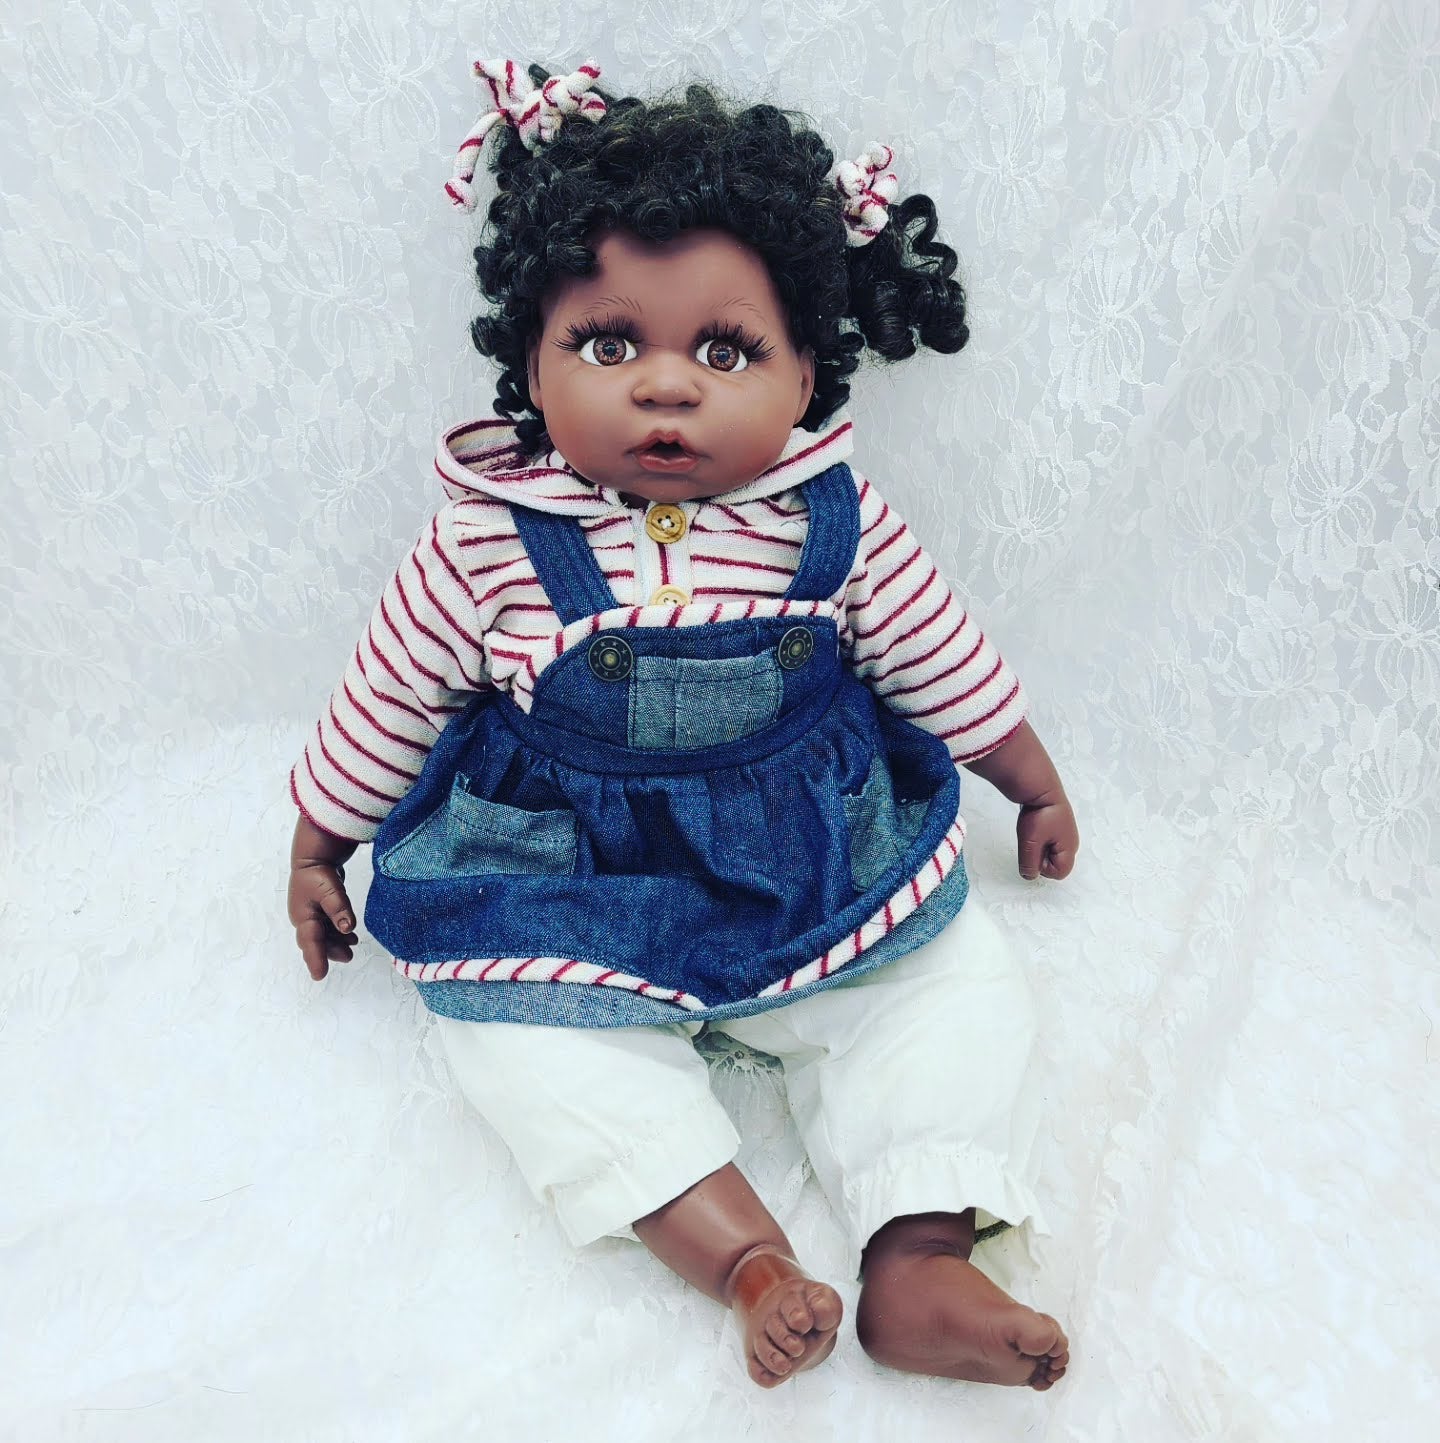 Reserved Tara 2/3 SALE! Danya Haunted Doll ~ 23" African American Vinyl Toddler Vessel ~ Paranormal ~ Sweet Girl ~ Thinks She's Bigger Than She Is ~ Wannabe Big Sister